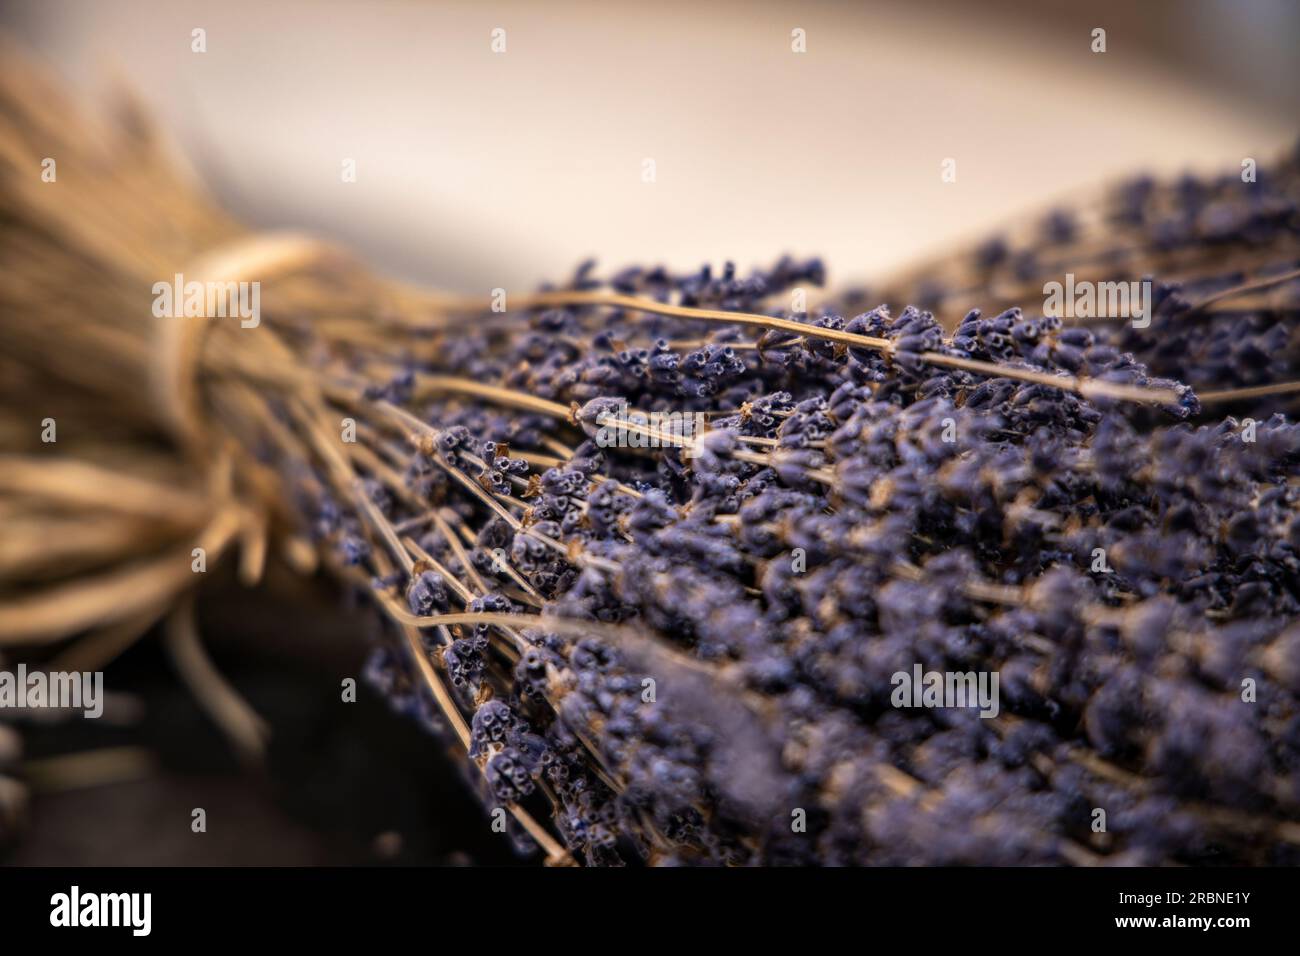 Dried lavender at L'Occitane en Provence visitor center and factory, Manosque, Alpes-de-Haute-Provence, France, Europe Stock Photo